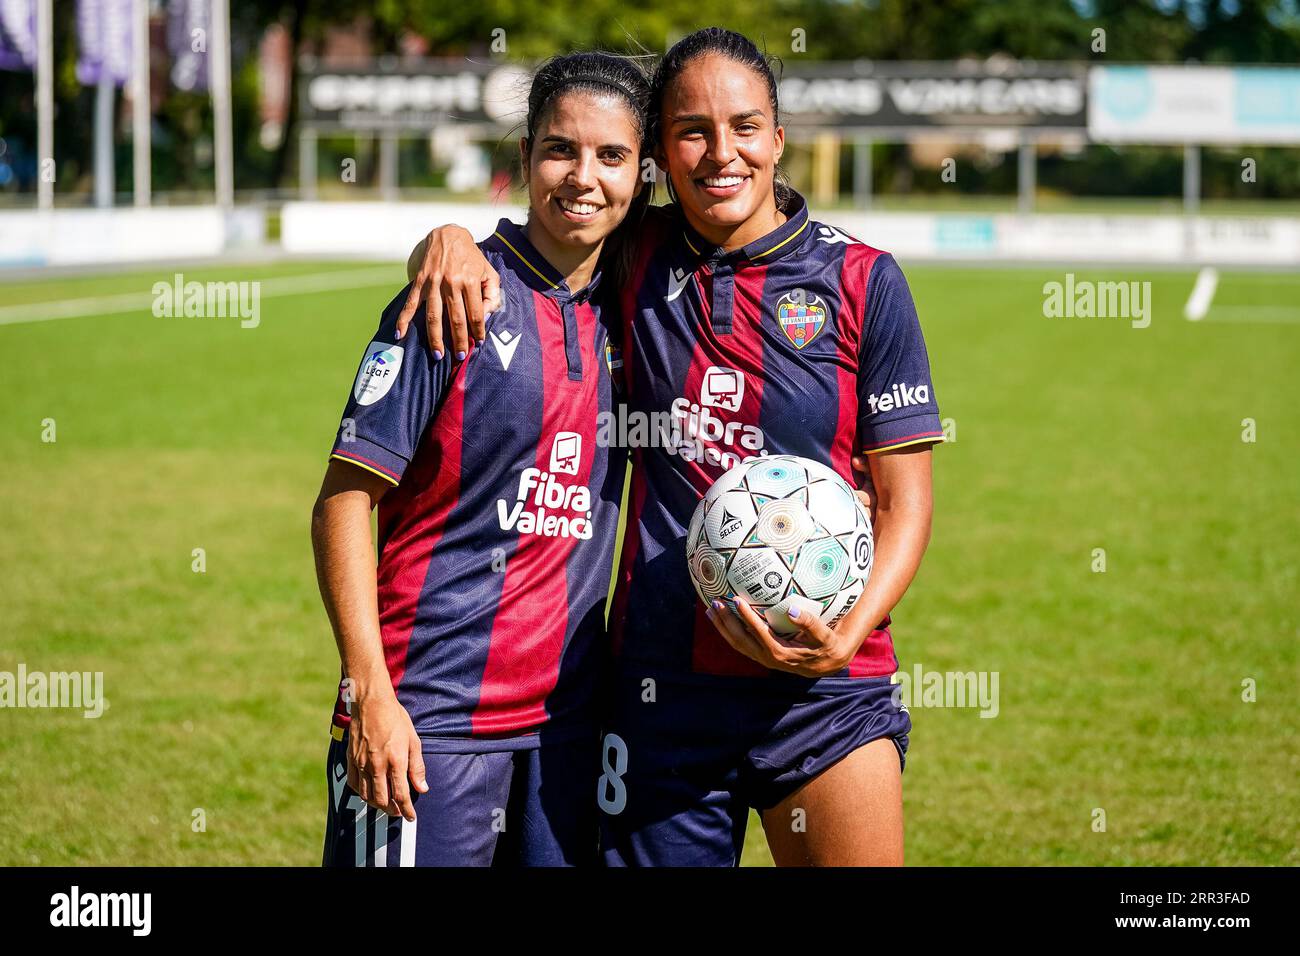 Enschede, Netherlands. 06th Sep, 2023. ENSCHEDE, NETHERLANDS - SEPTEMBER 6: Goalscorers Alba Maria Redondo Ferrer of Levante UD and Gabi Nunes of Levante UD during the UEFA Women's Champions League LP Group 1 Semi Final match between Levante UD and Stjarnan at the Sportpark Schreurserve on September 6, 2023 in Enschede, Netherlands (Photo by Rene Nijhuis/BSR Agency) Credit: BSR Agency/Alamy Live News Stock Photo